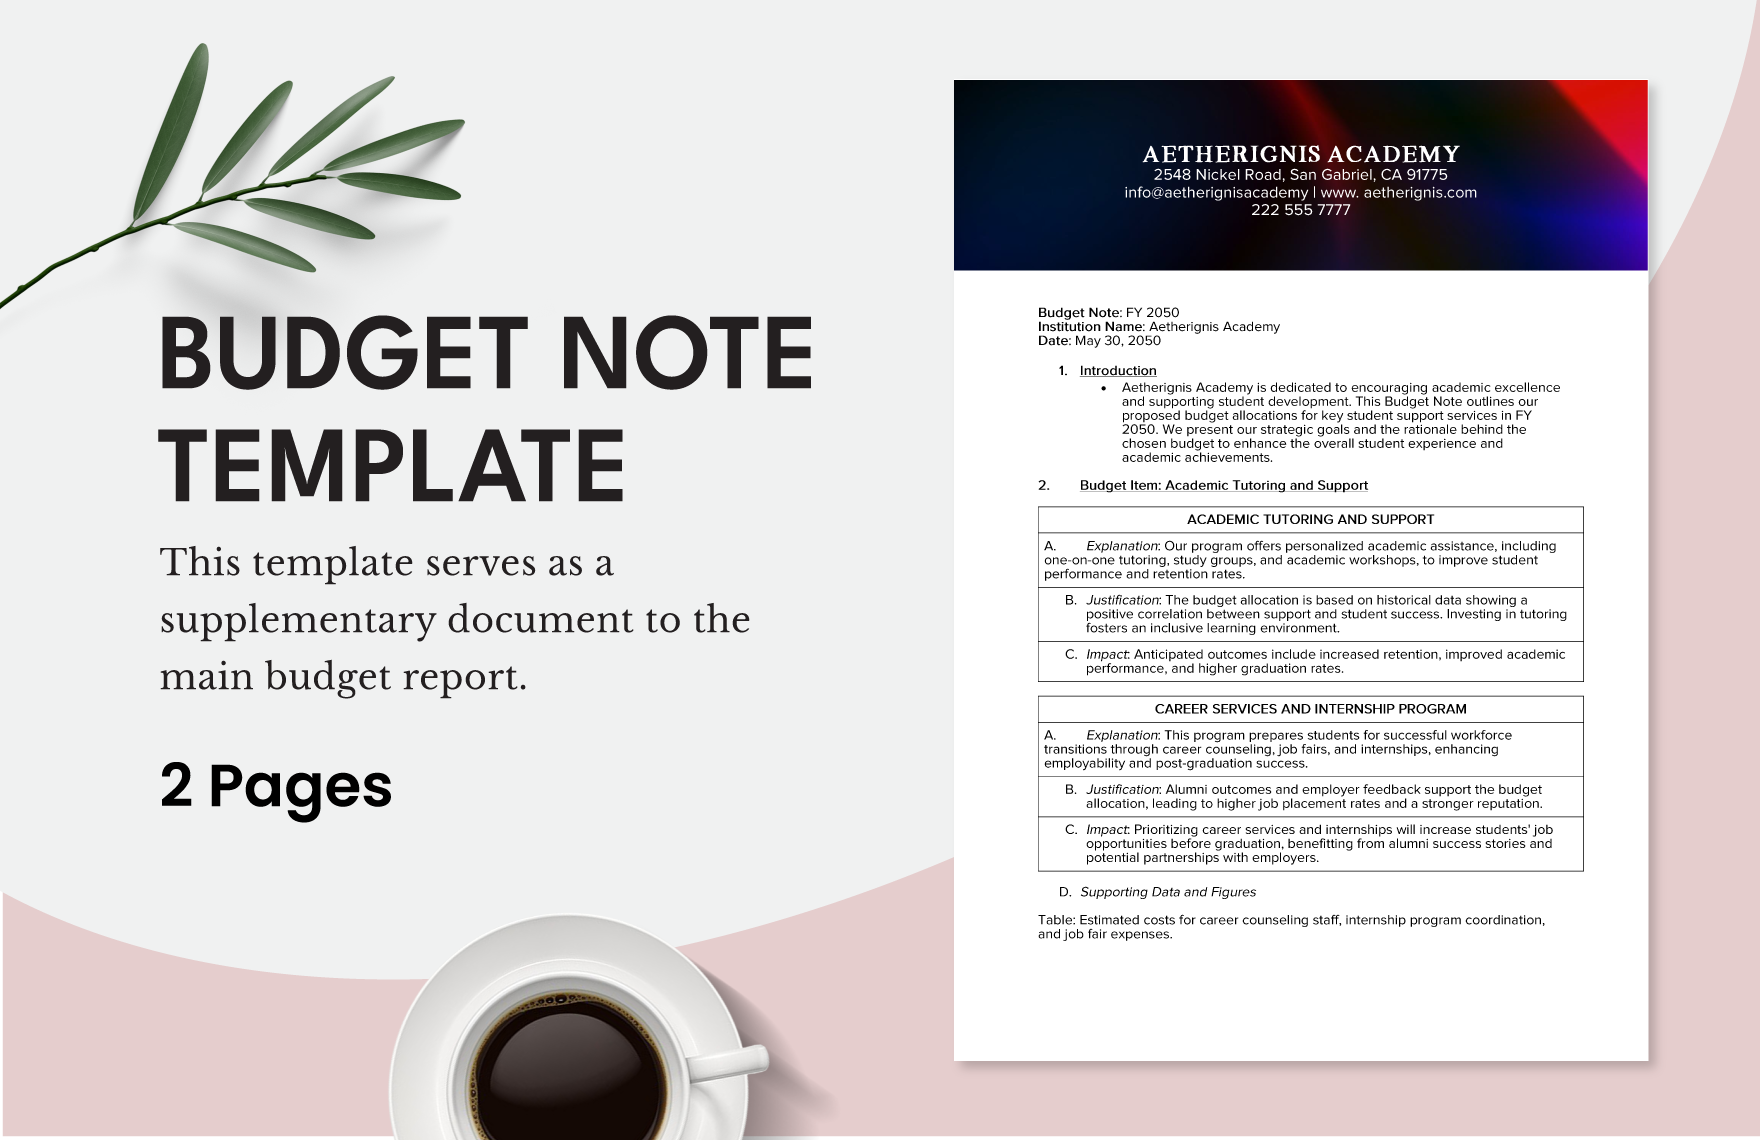 Budget Note Template